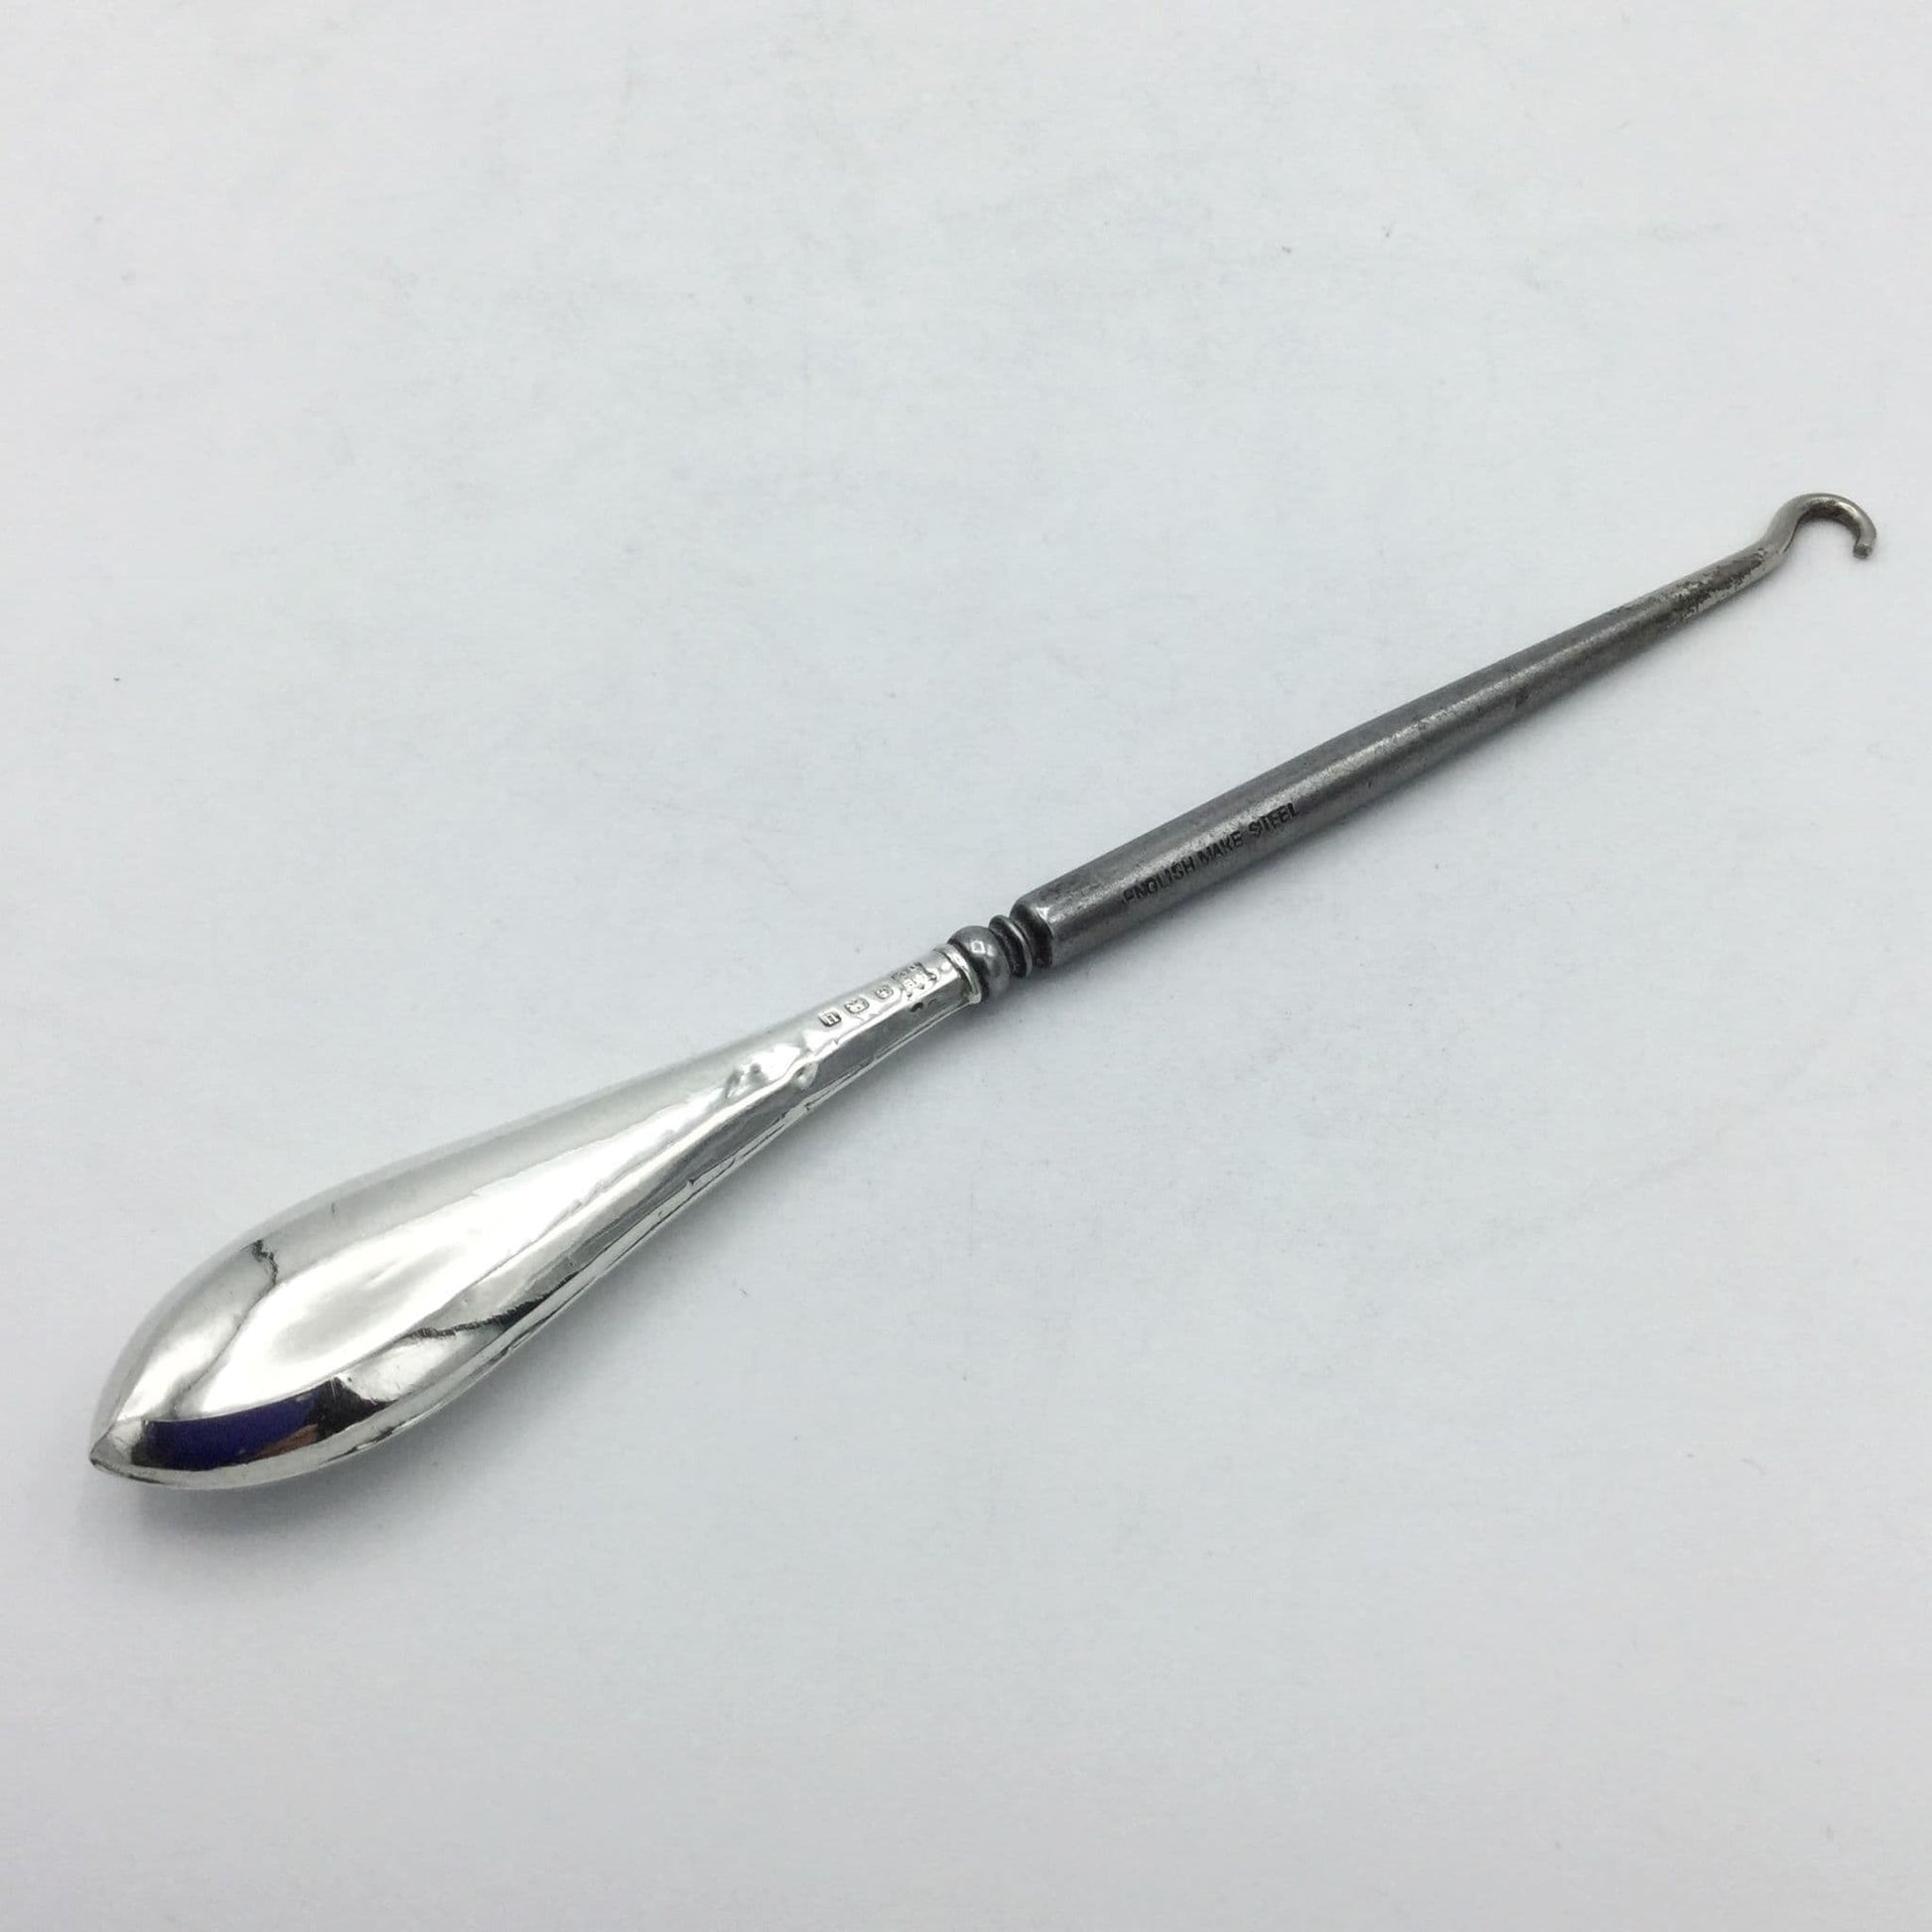 Silver handled button hook with a shiny handle and steel hook with hallmarks on a white background